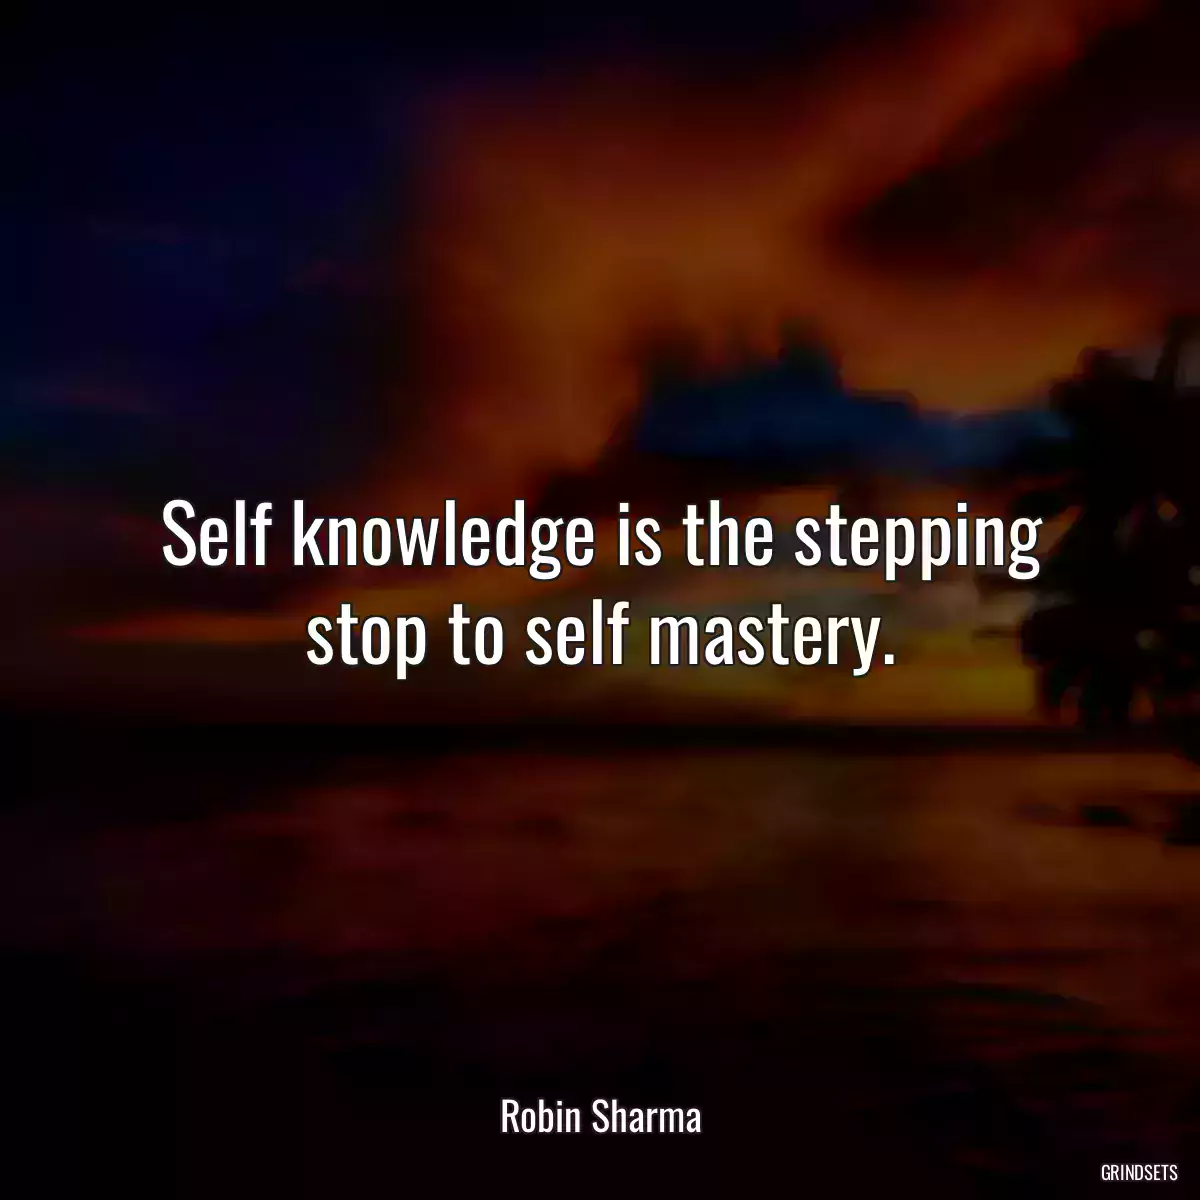 Self knowledge is the stepping stop to self mastery.